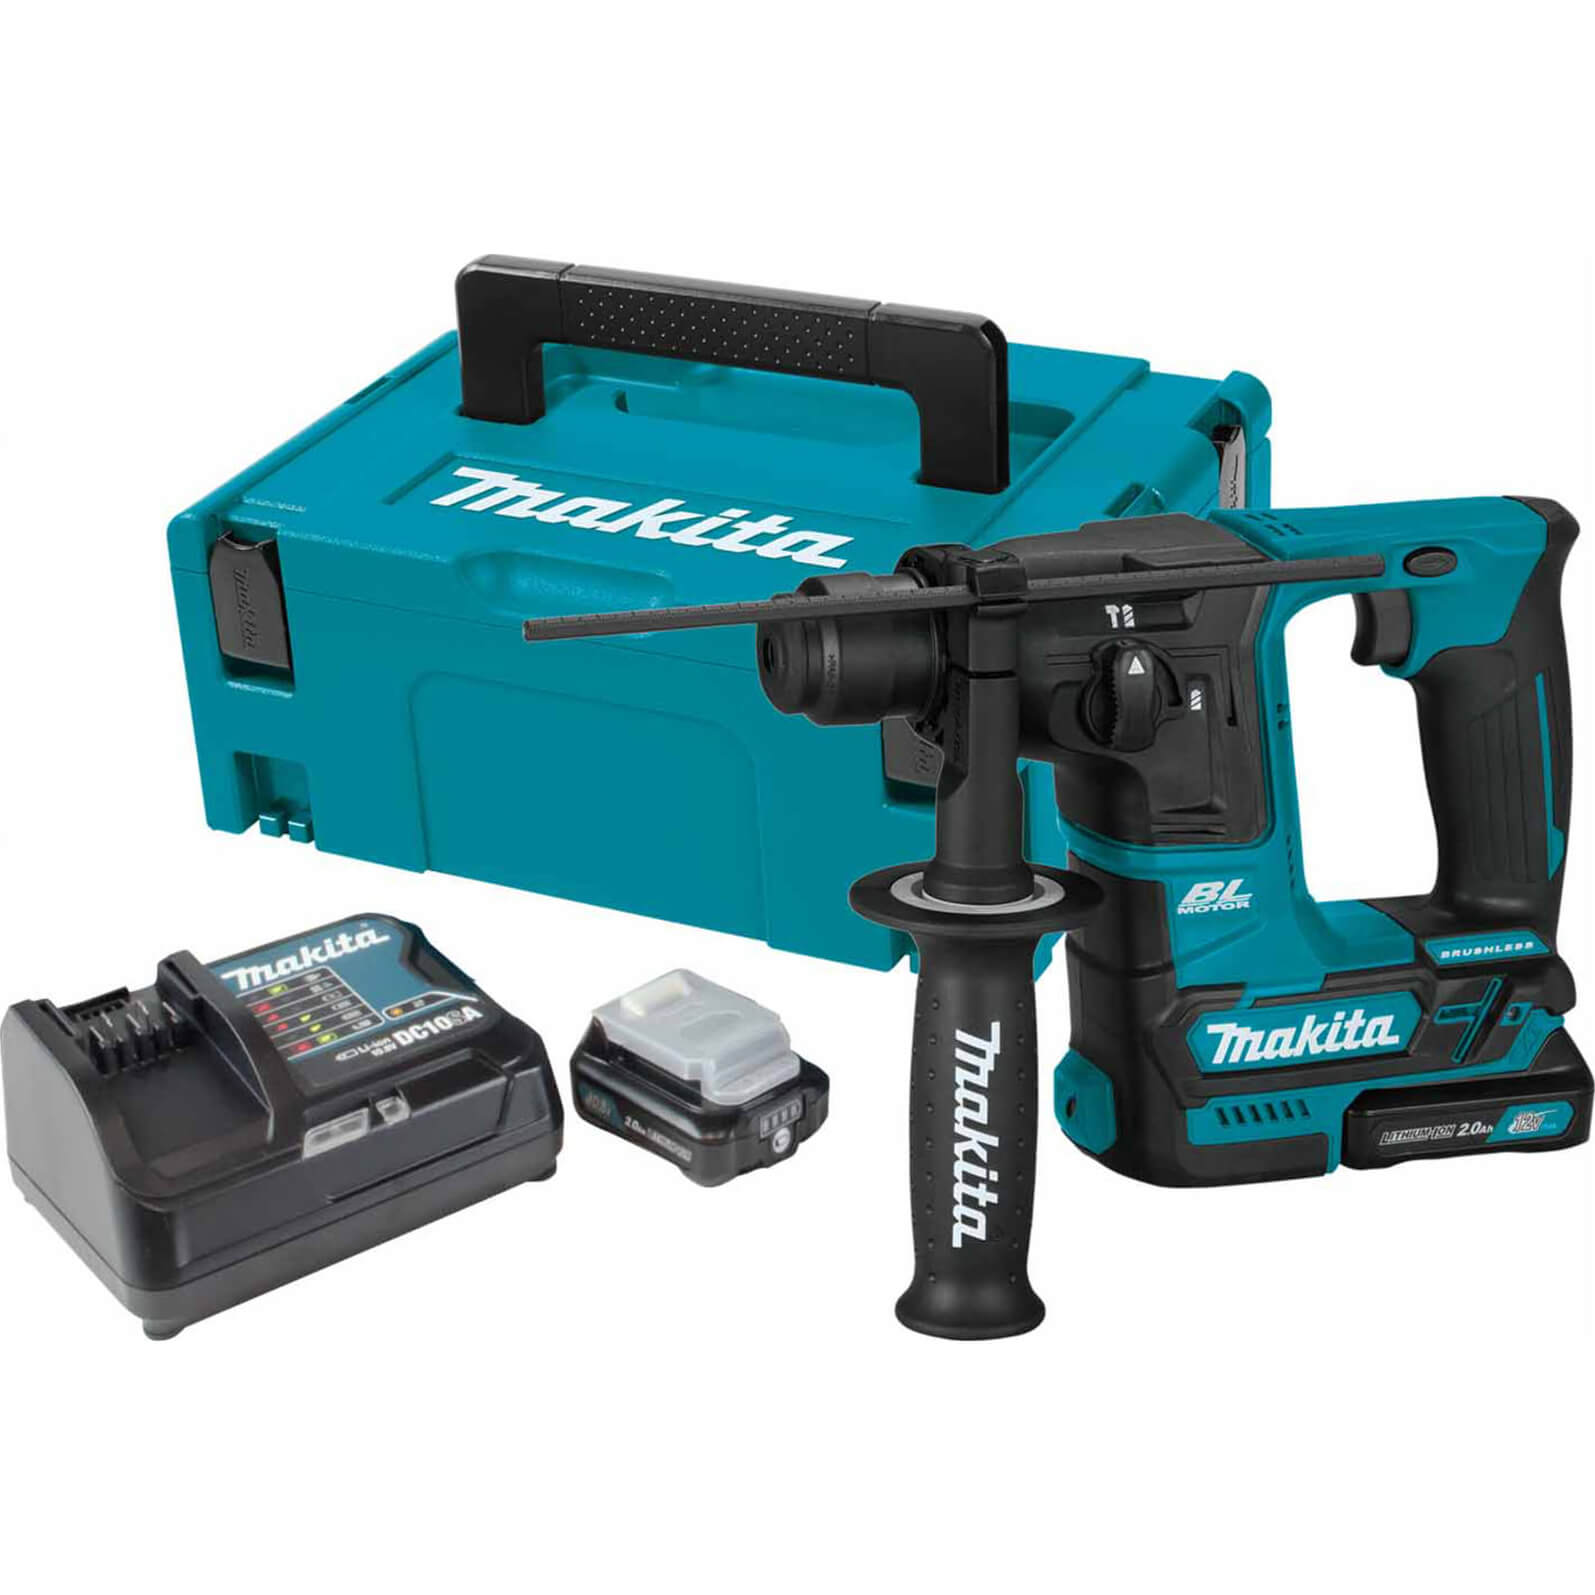 Image of Makita HR166D 12v Max CXT Cordless Brushless SDS Plus Rotary Hammer Drill 2 x 4ah Li-ion Charger Case